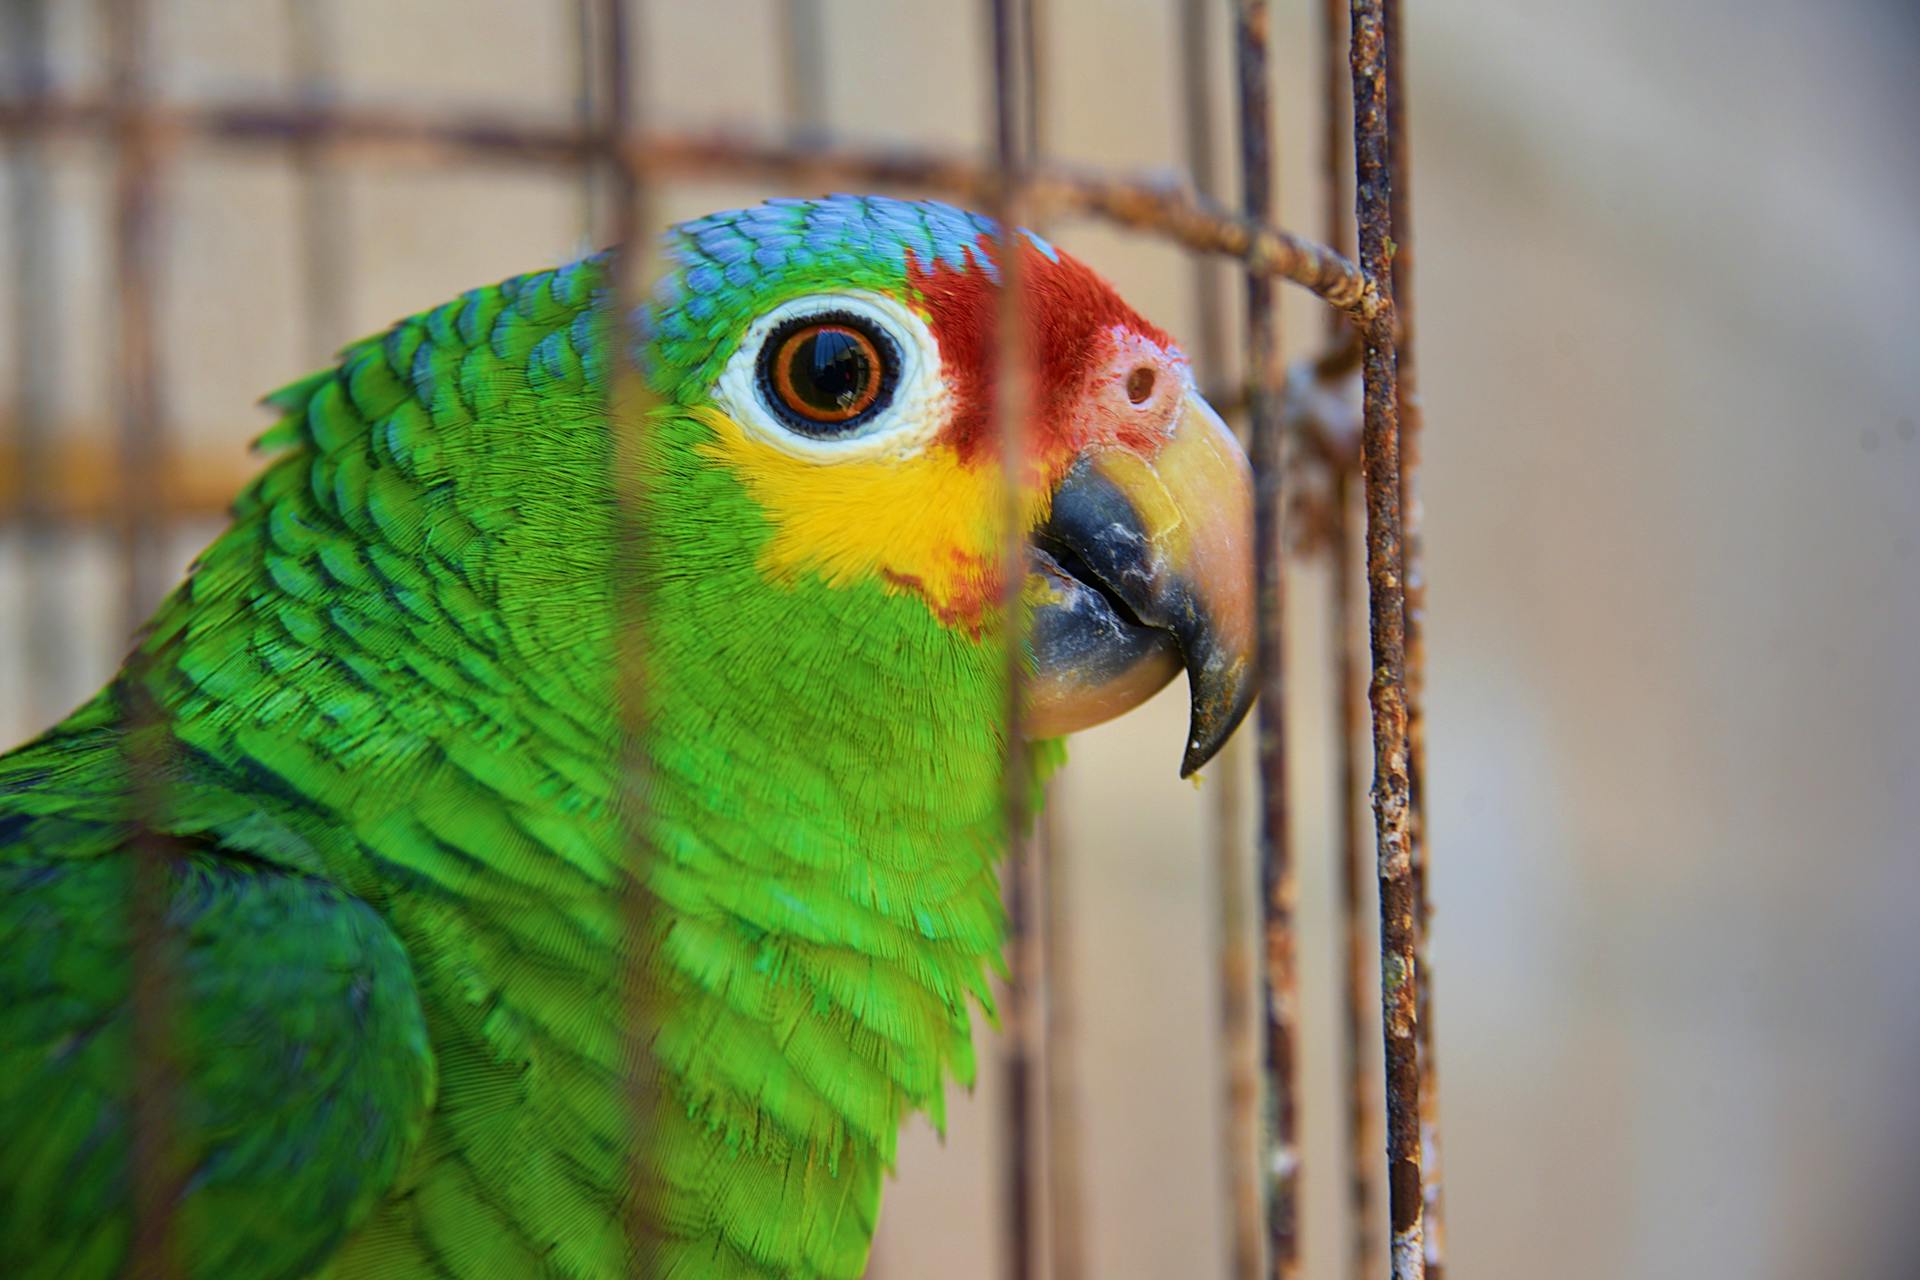 A green parrot in a cage | Source: Pexels